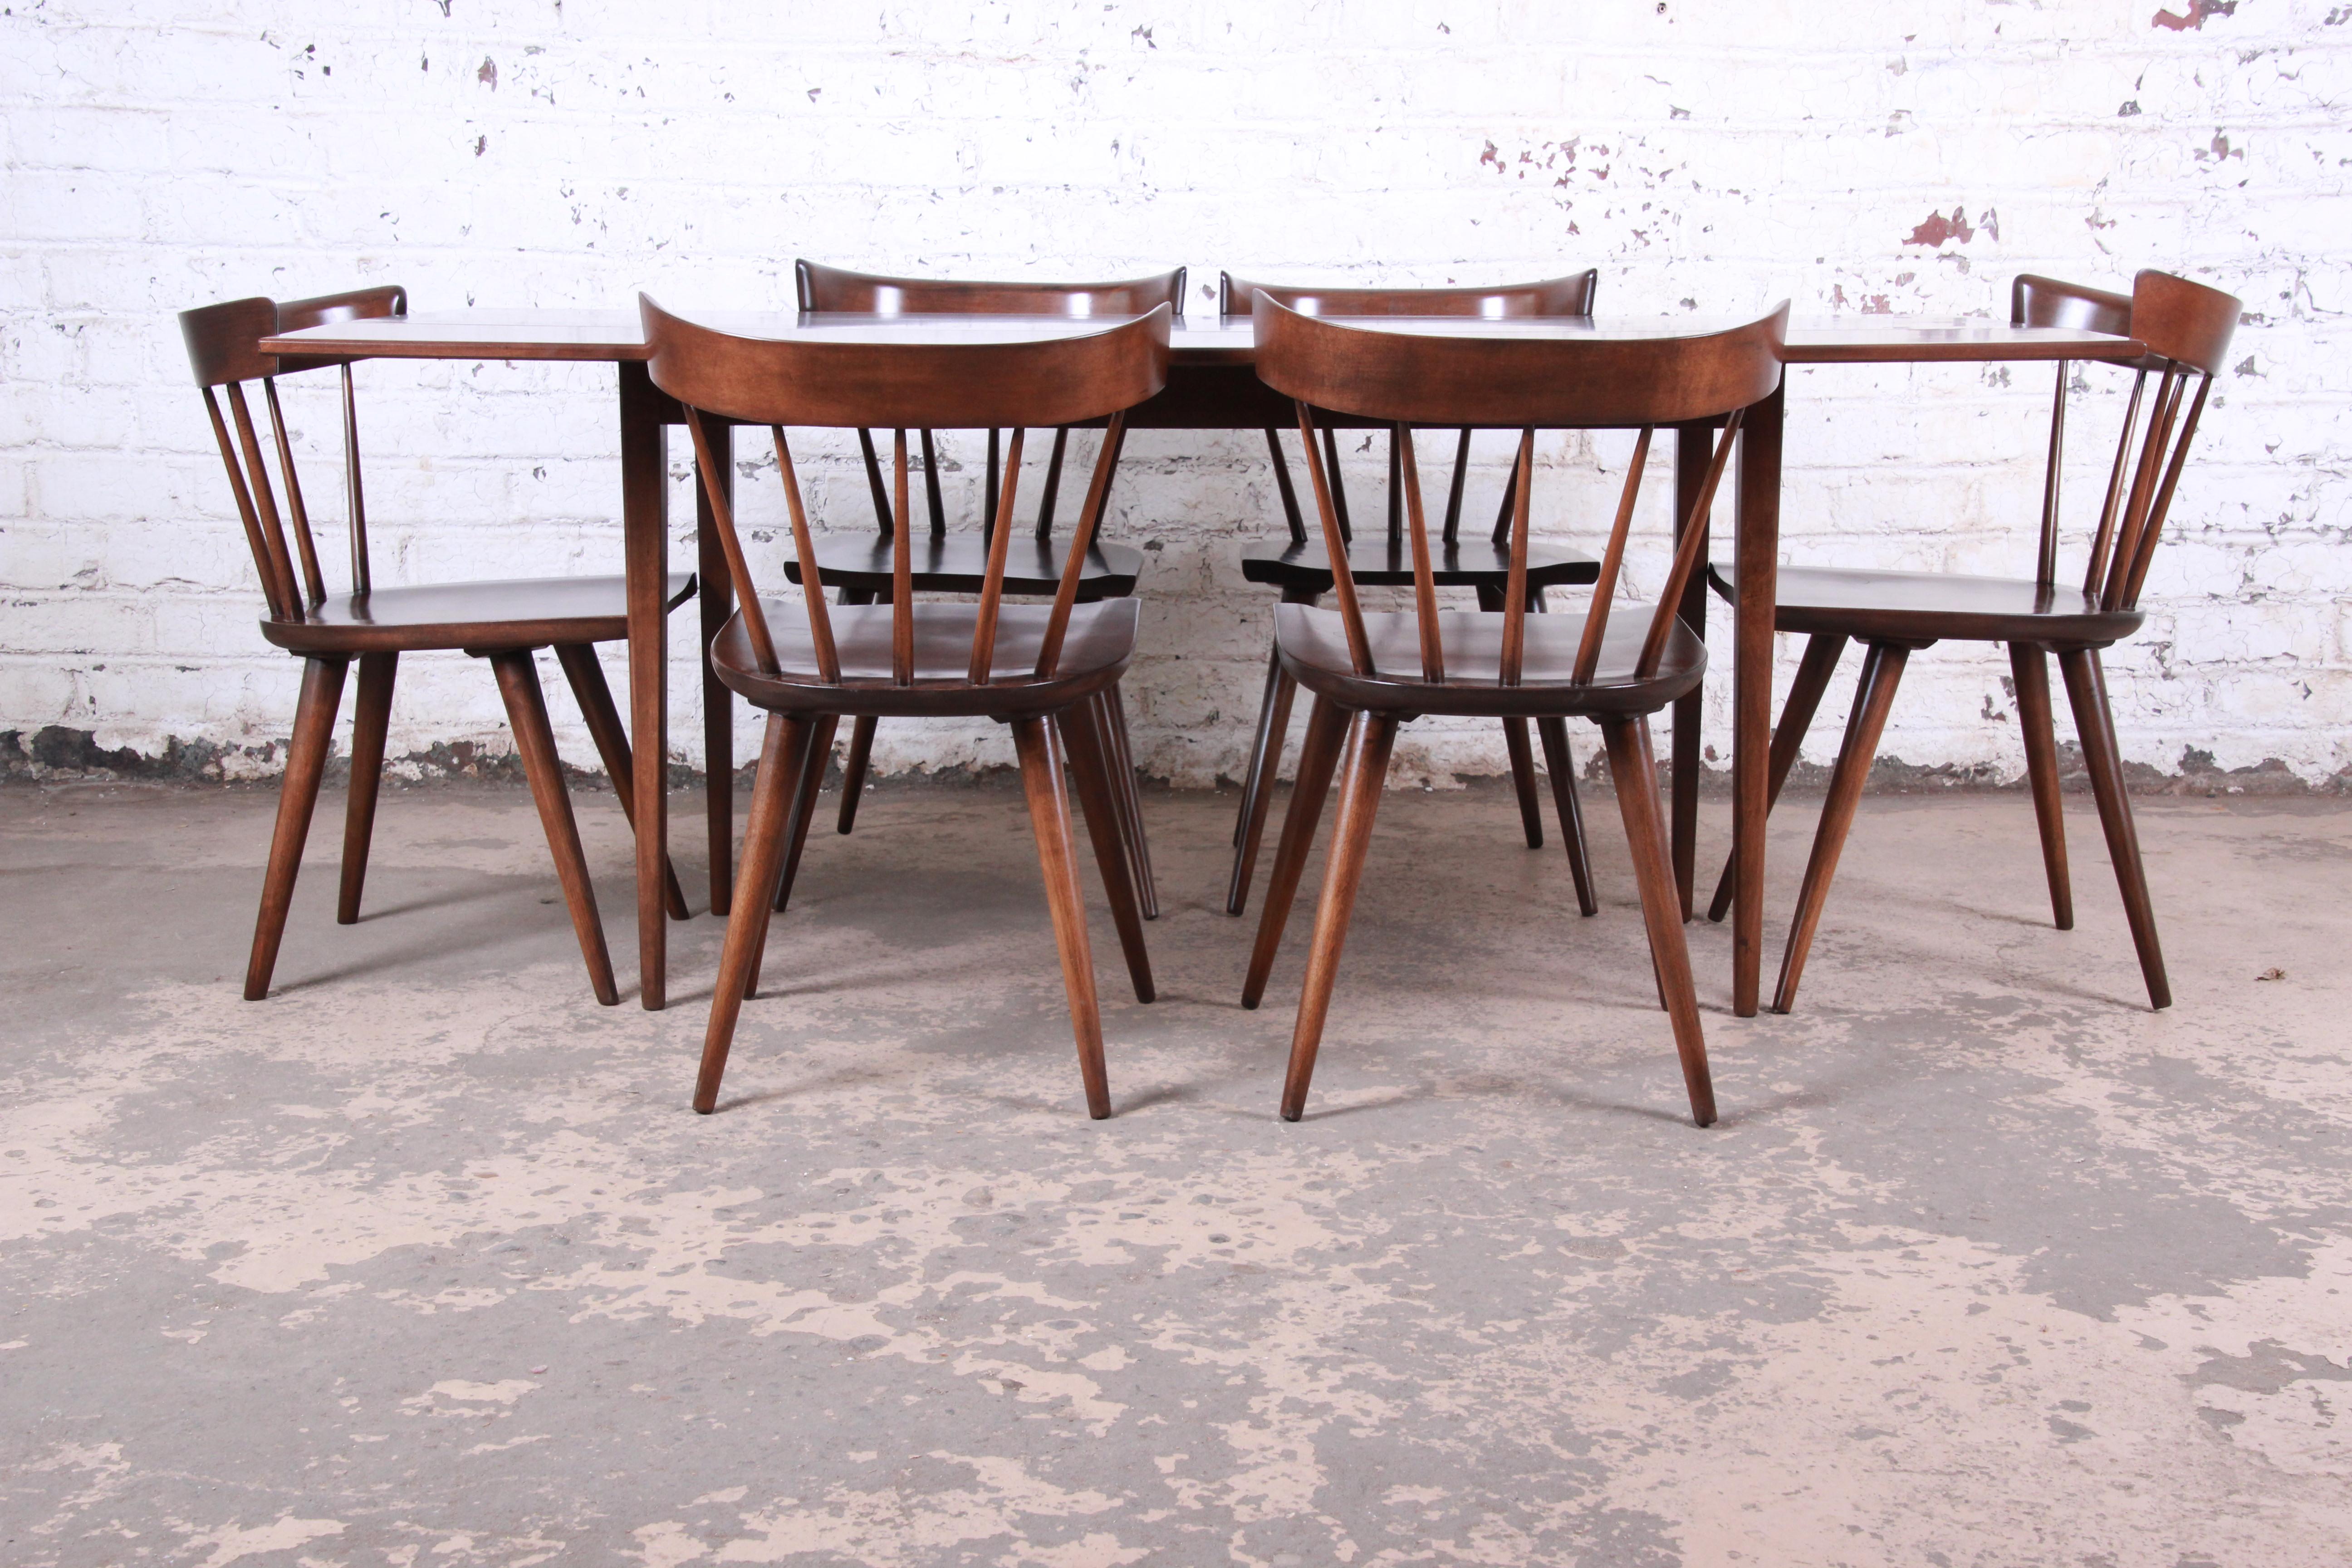 A rare and exceptional Mid-Century Modern seven-piece dining set including drop-leaf harvest table and six spindle back dining chairs

Designed by Paul McCobb for his Planner Group line for Winchendon Furniture

USA, 1950s

Solid birch